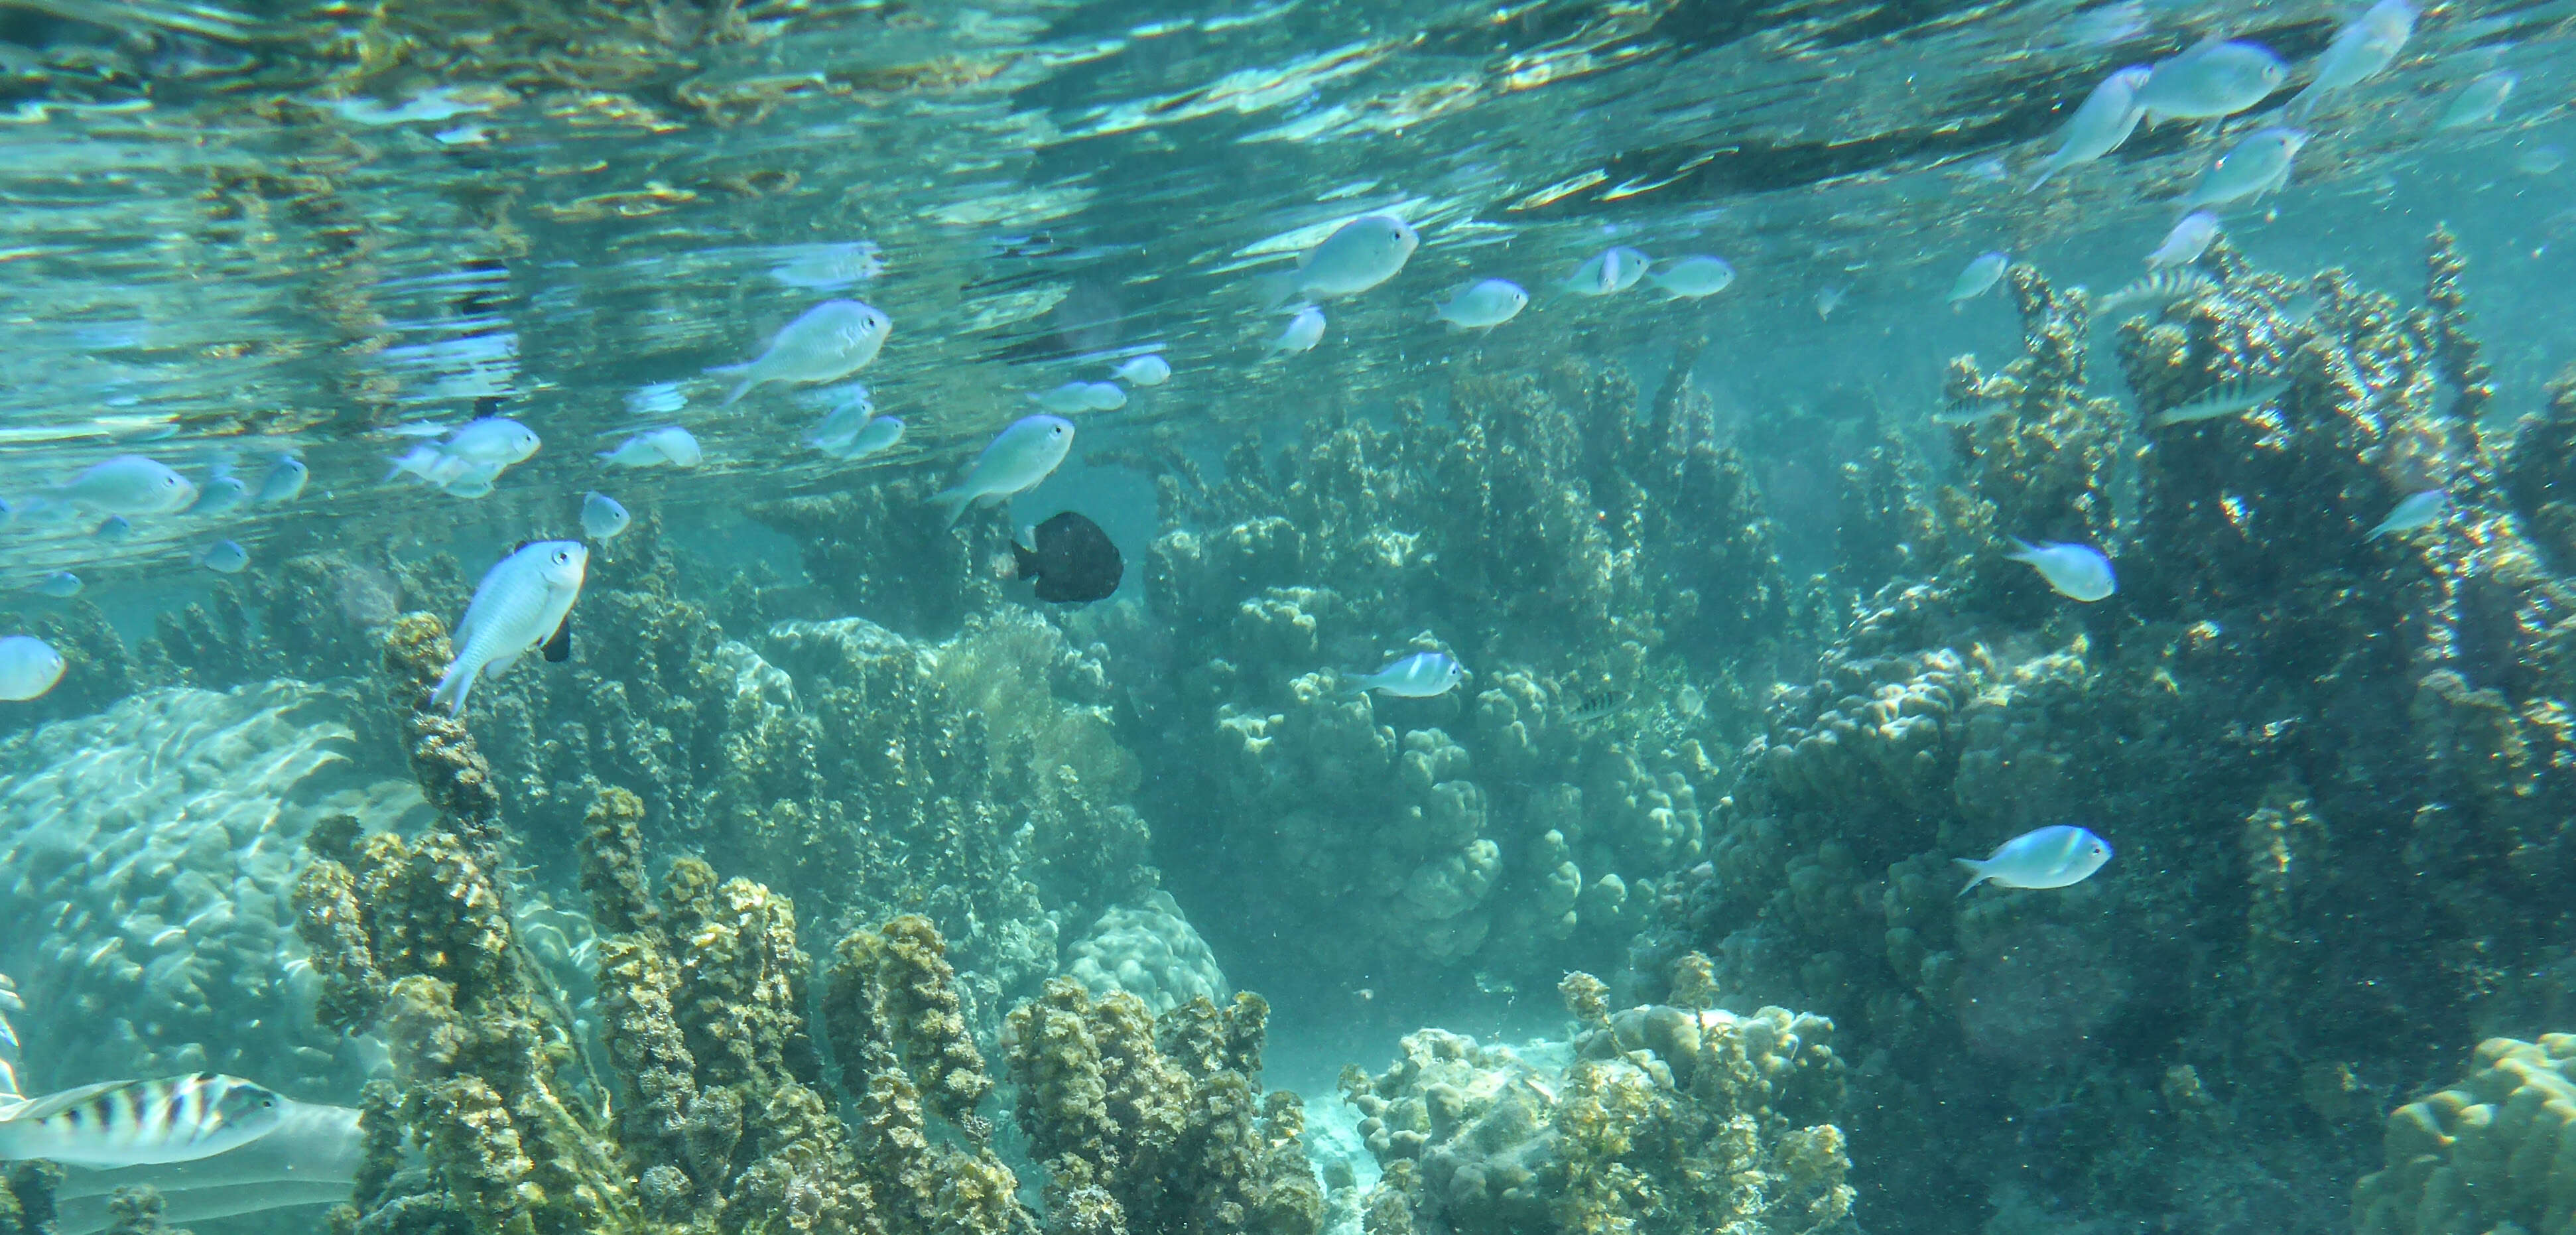 Image of Chromis Fishes